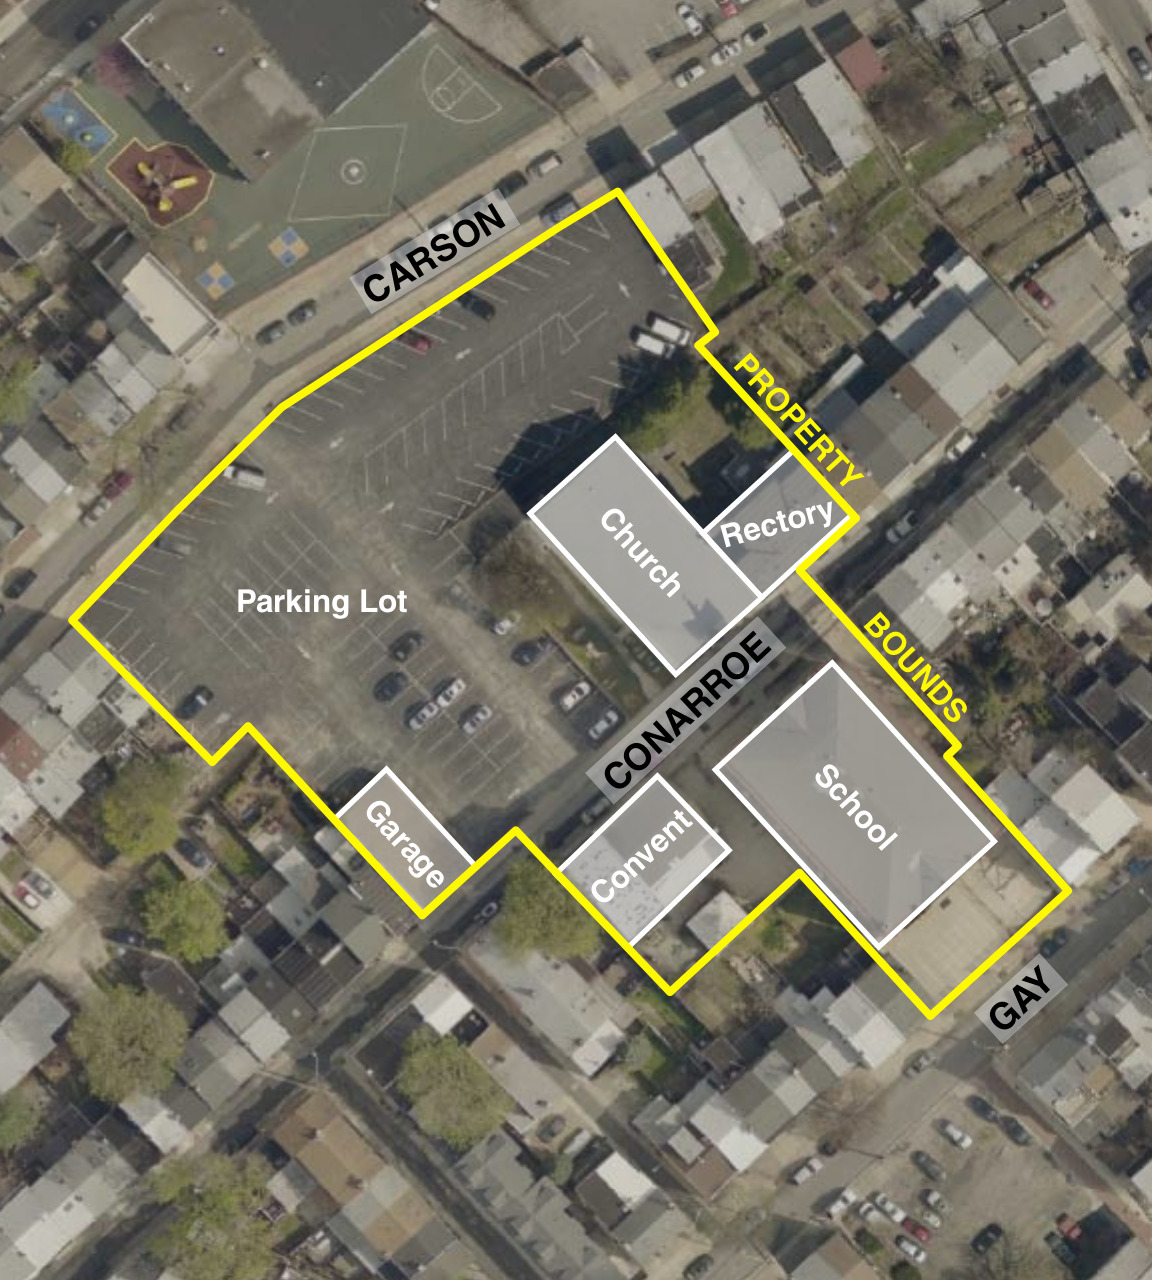 The St. Mary's complex covers is about one acre..| courtesy of Manayunk Neighborhood Council